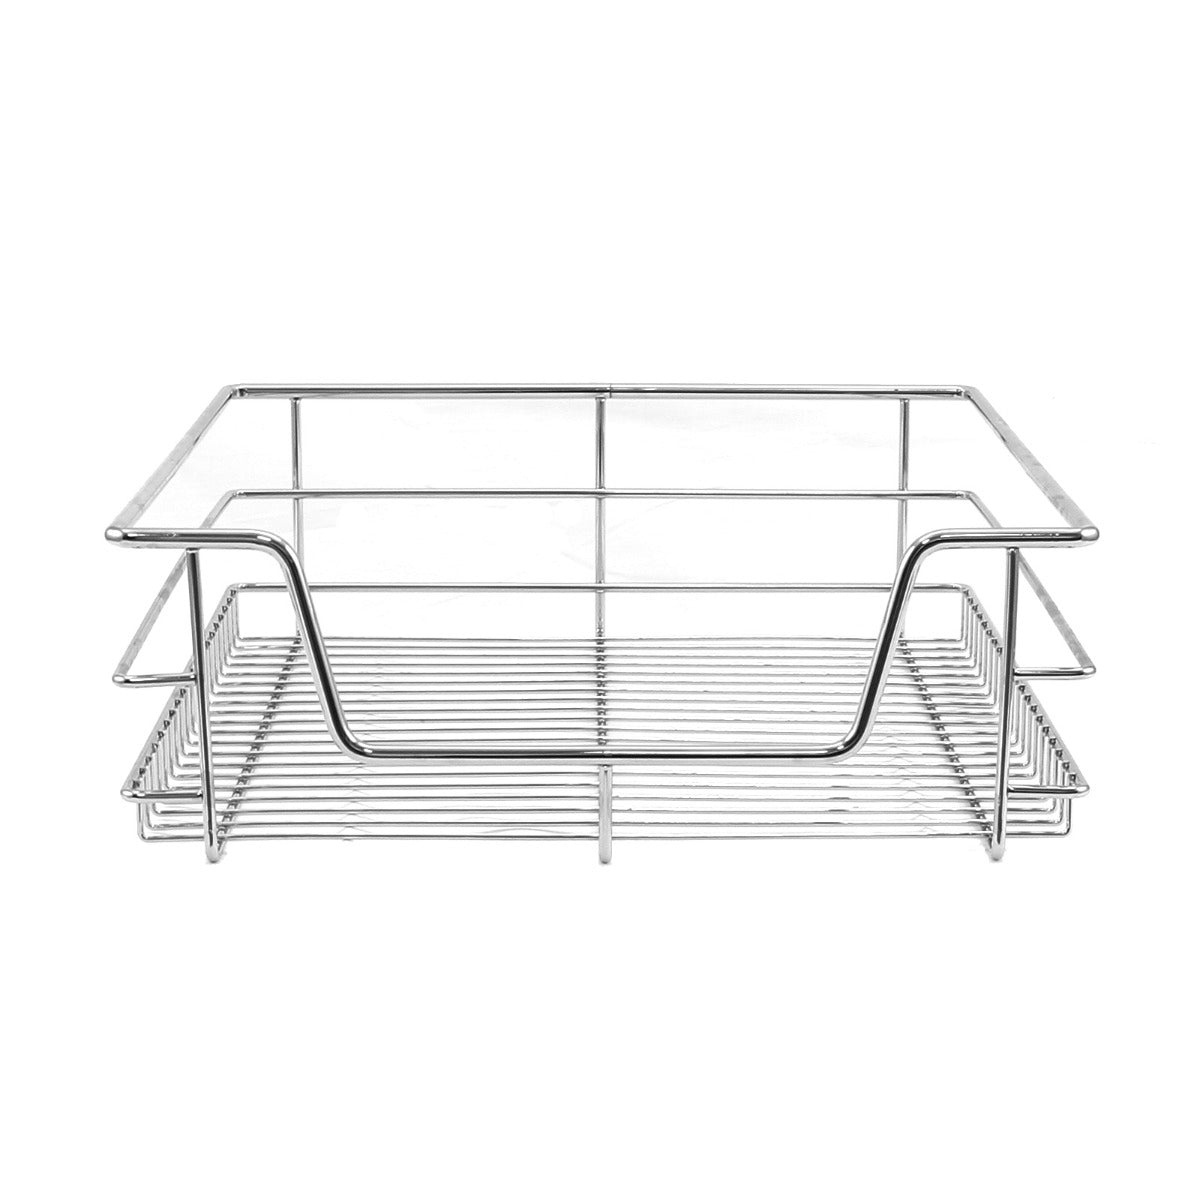 6 x KuKoo Kitchen Pull Out Storage Baskets – 500mm Wide Cabinet